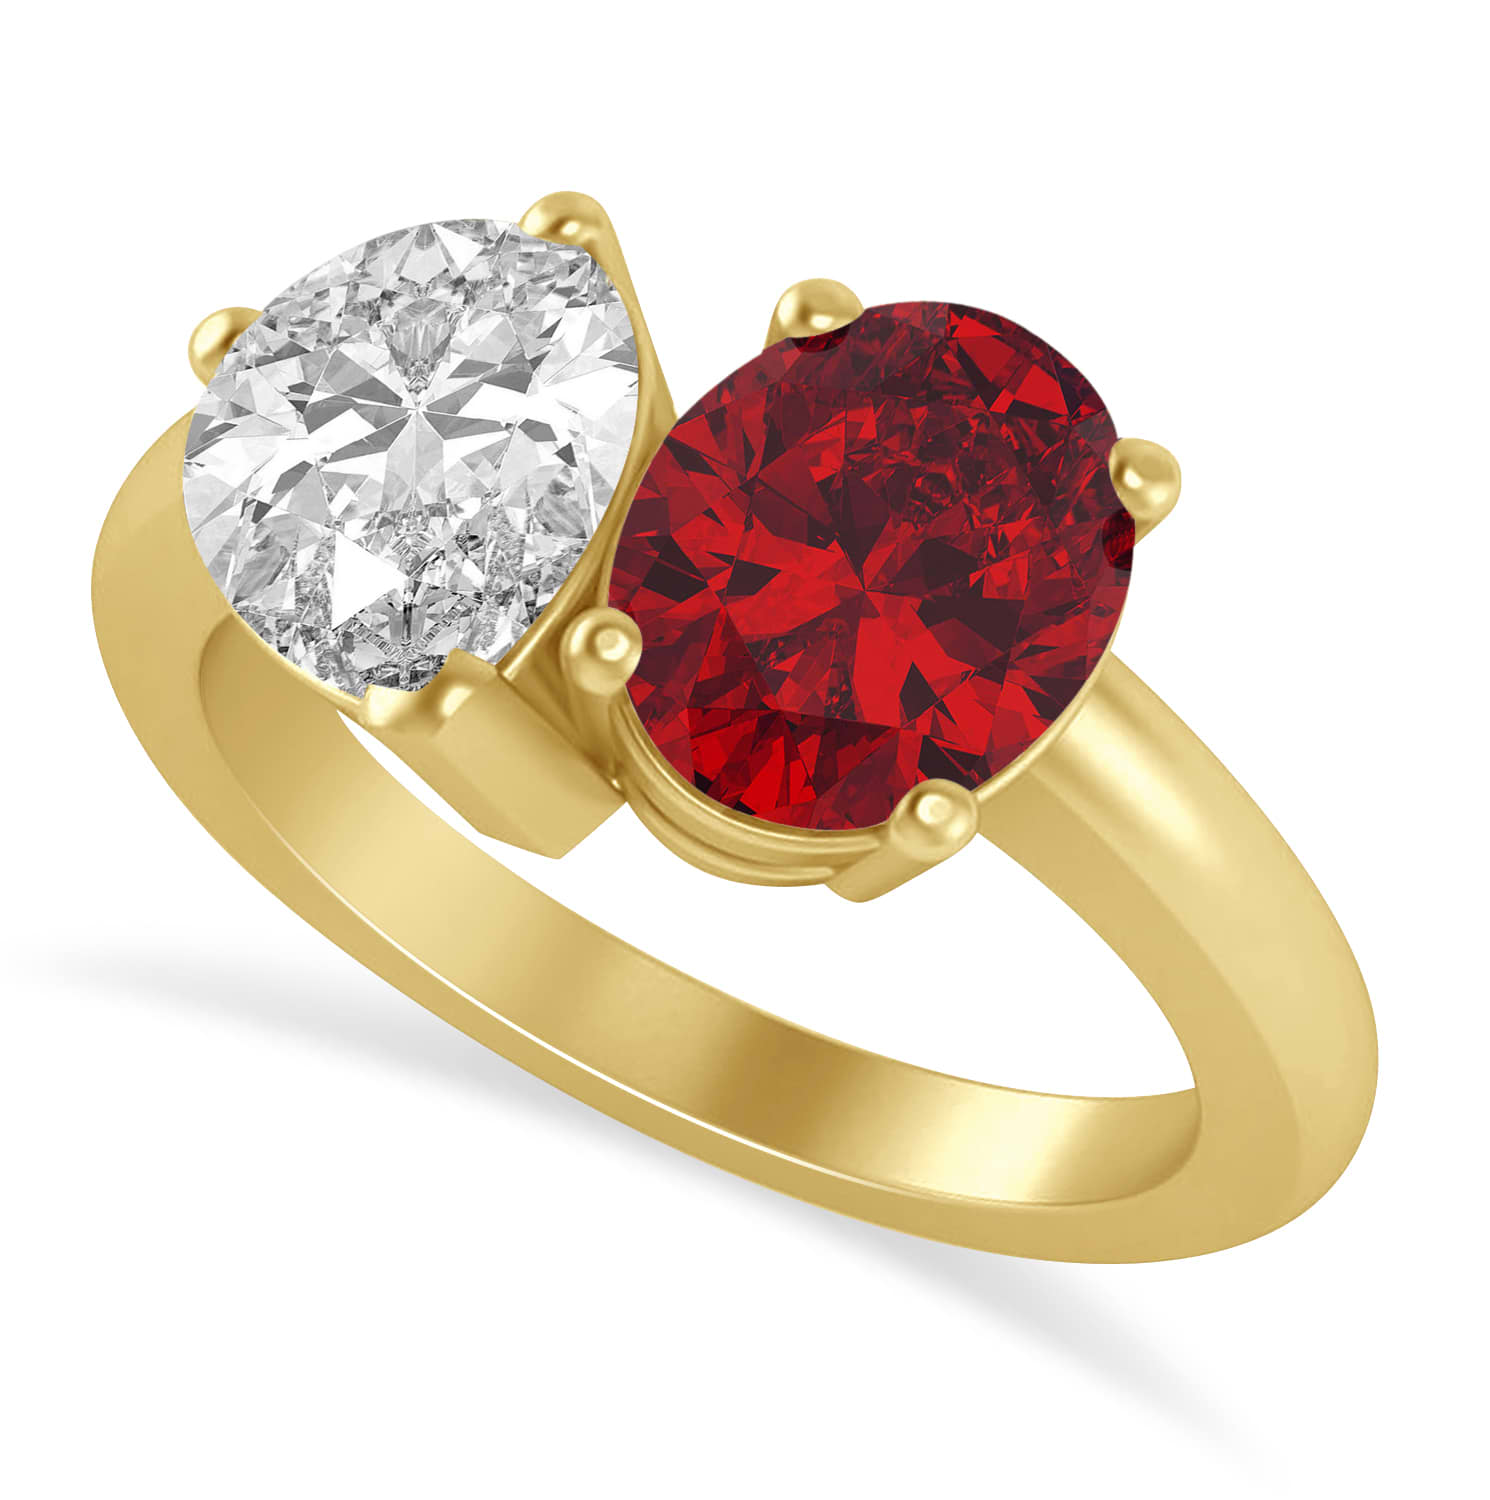 Oval/Pear Diamond & Ruby Toi et Moi Ring 18k Yellow Gold (4.50ct)